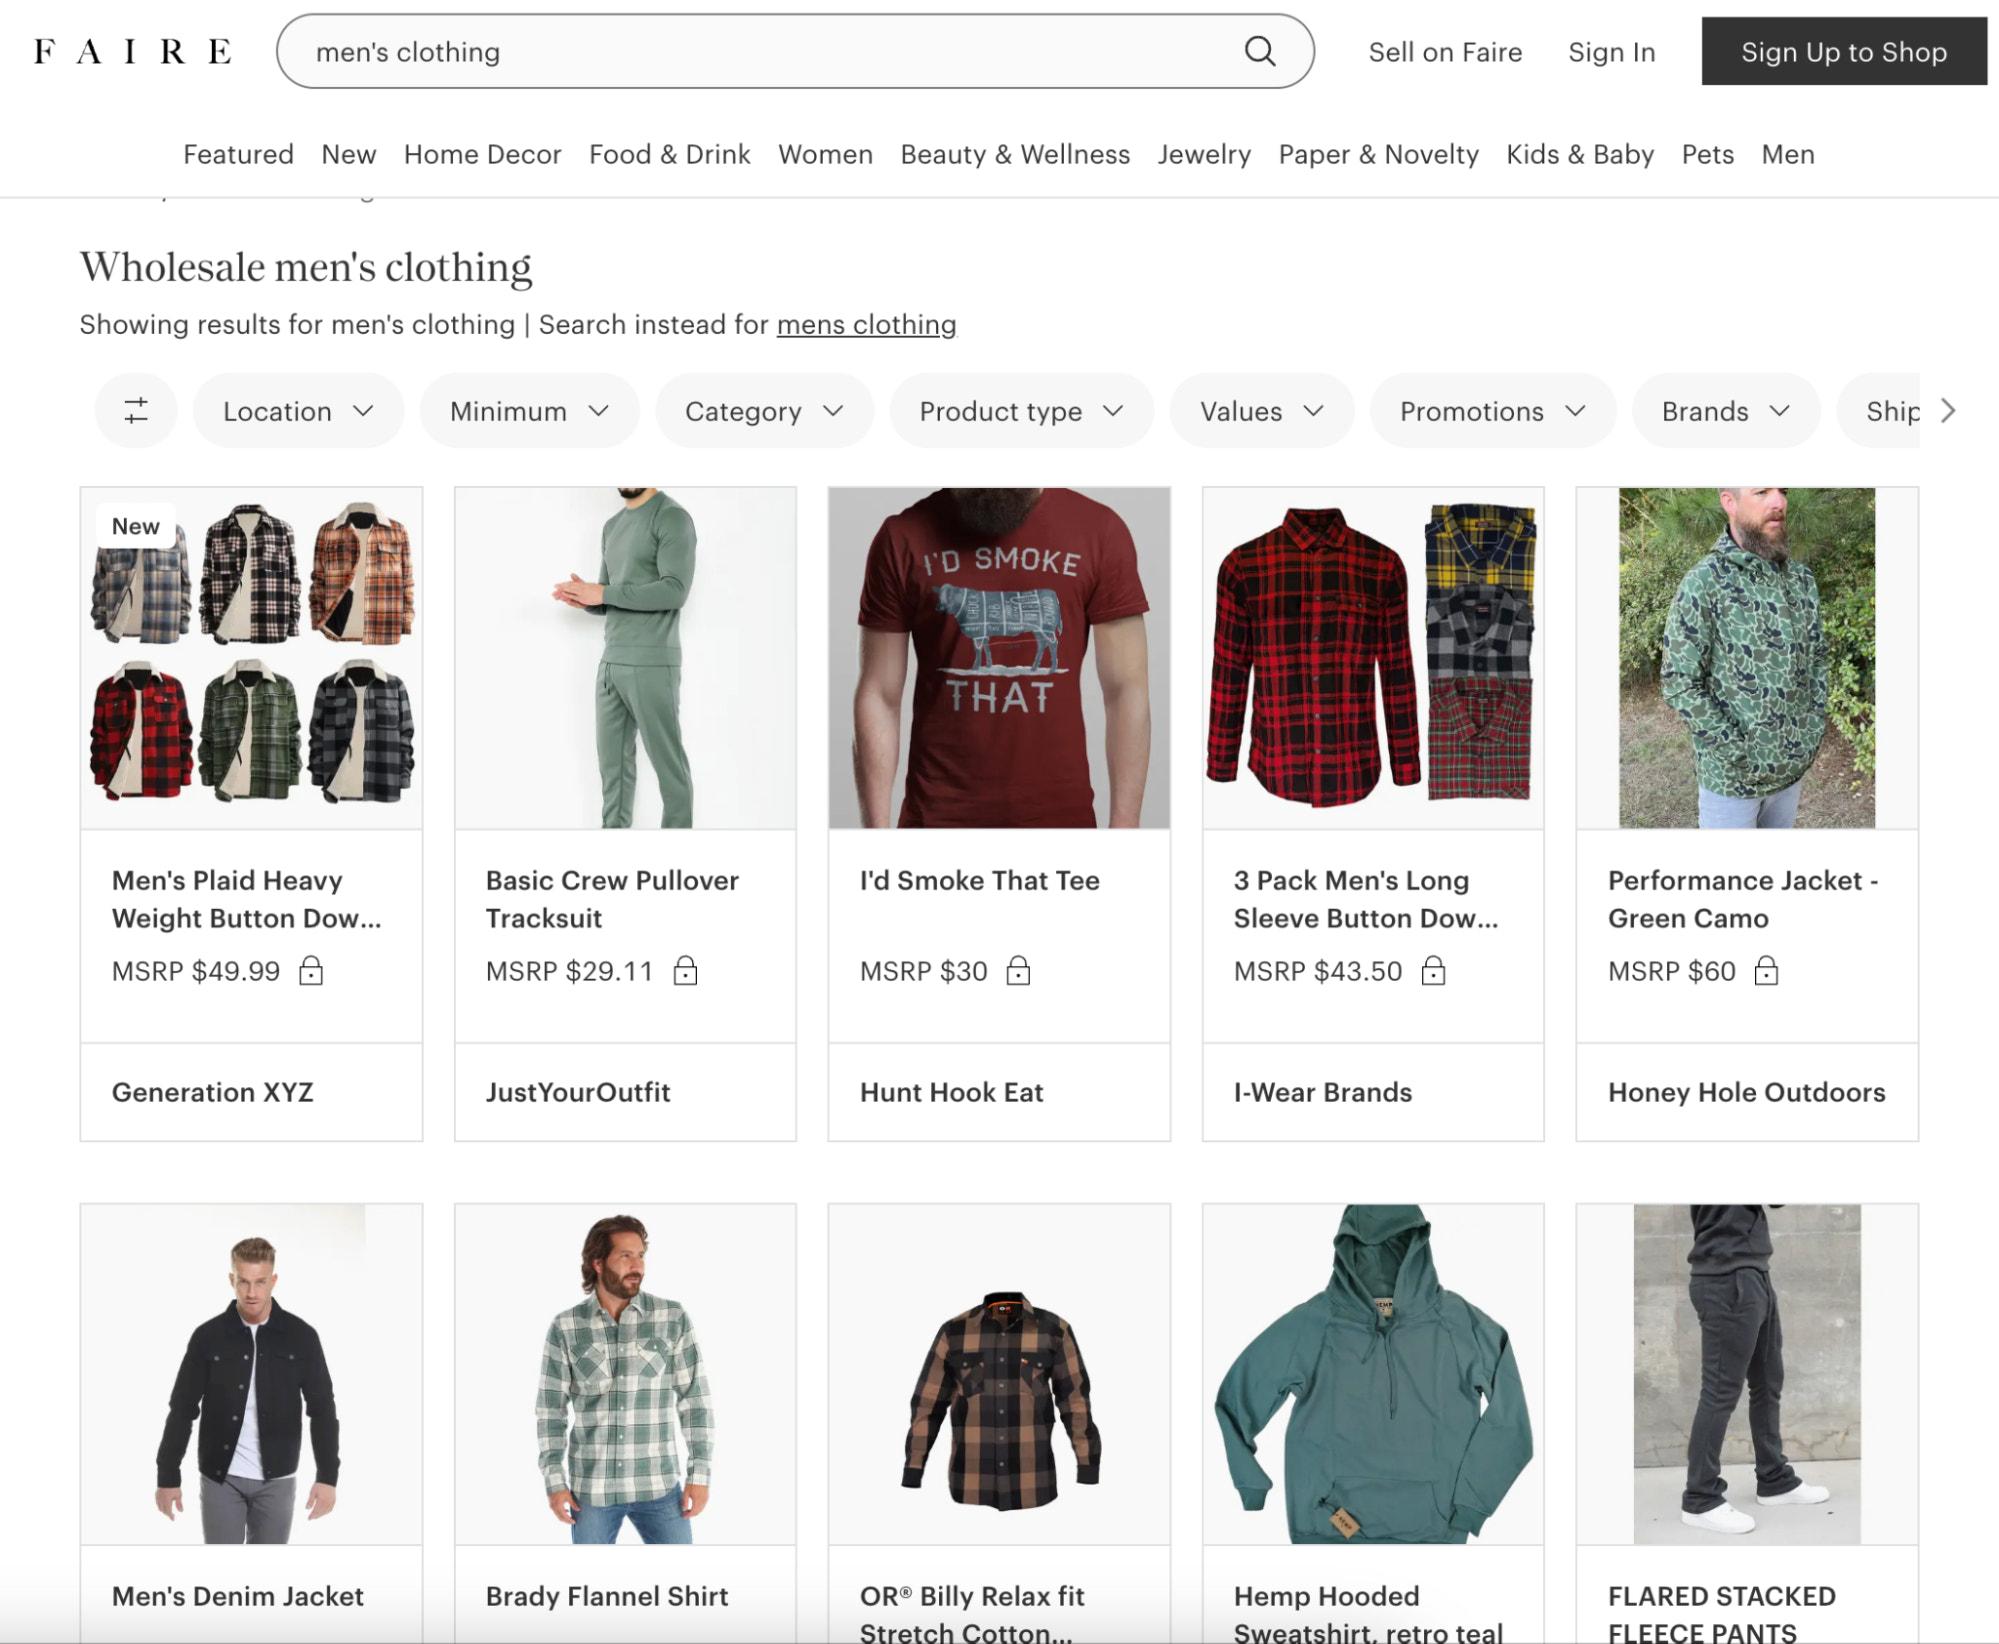 Image of Faire wholesale marketplace showing results for “men’s clothing” query